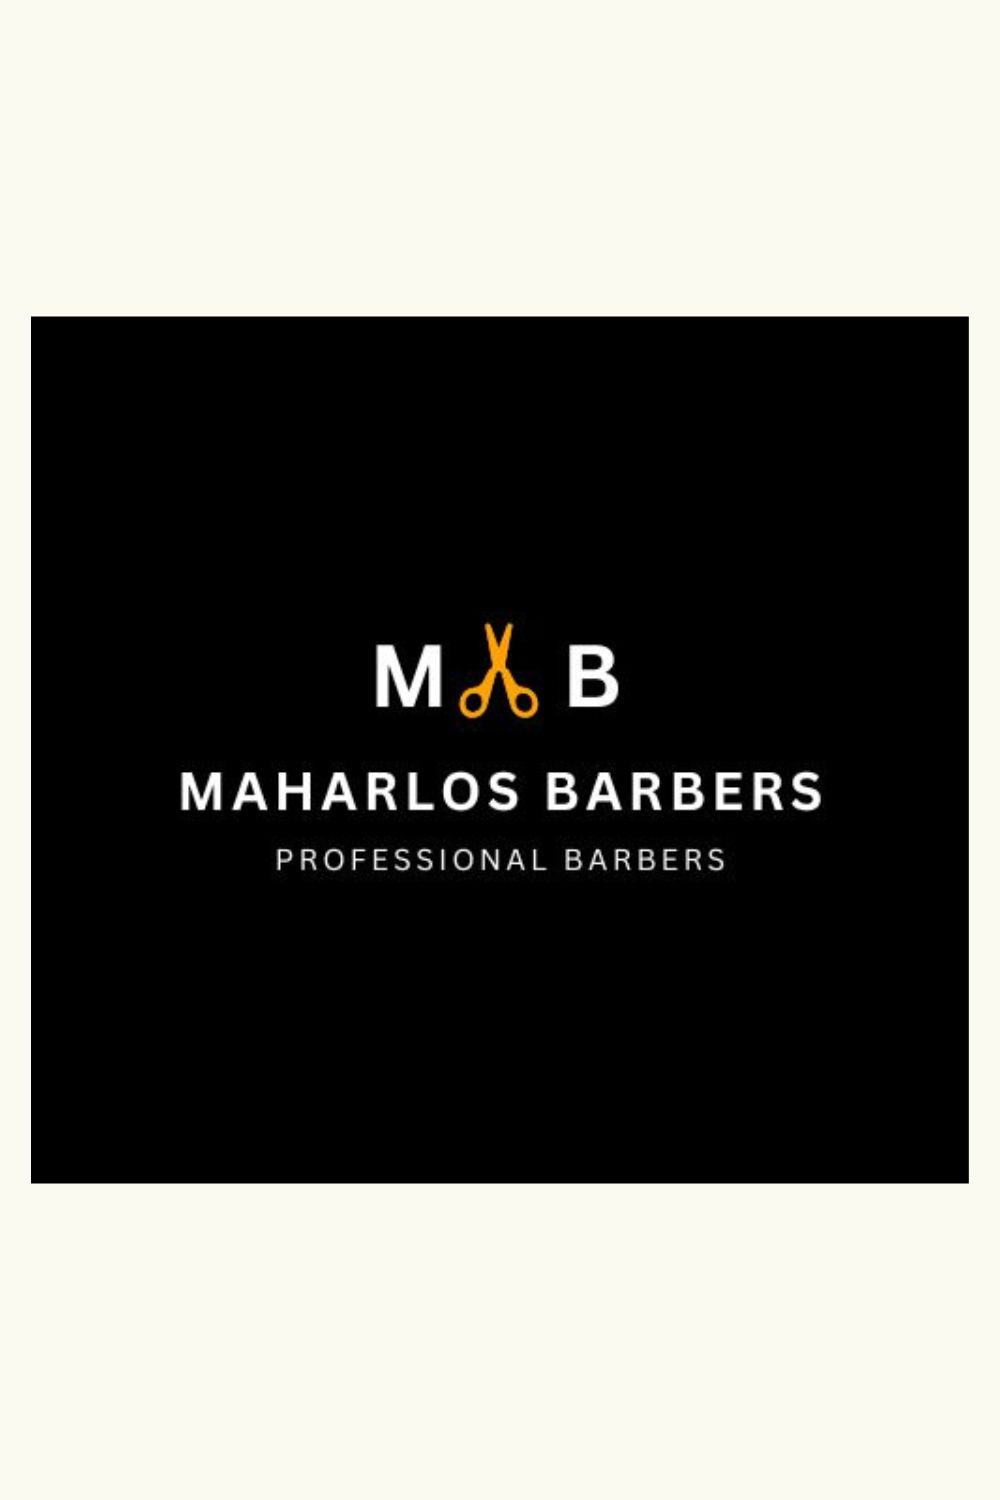 Professional Barber Logo Templates (Canva, 500x500px) pinterest preview image.